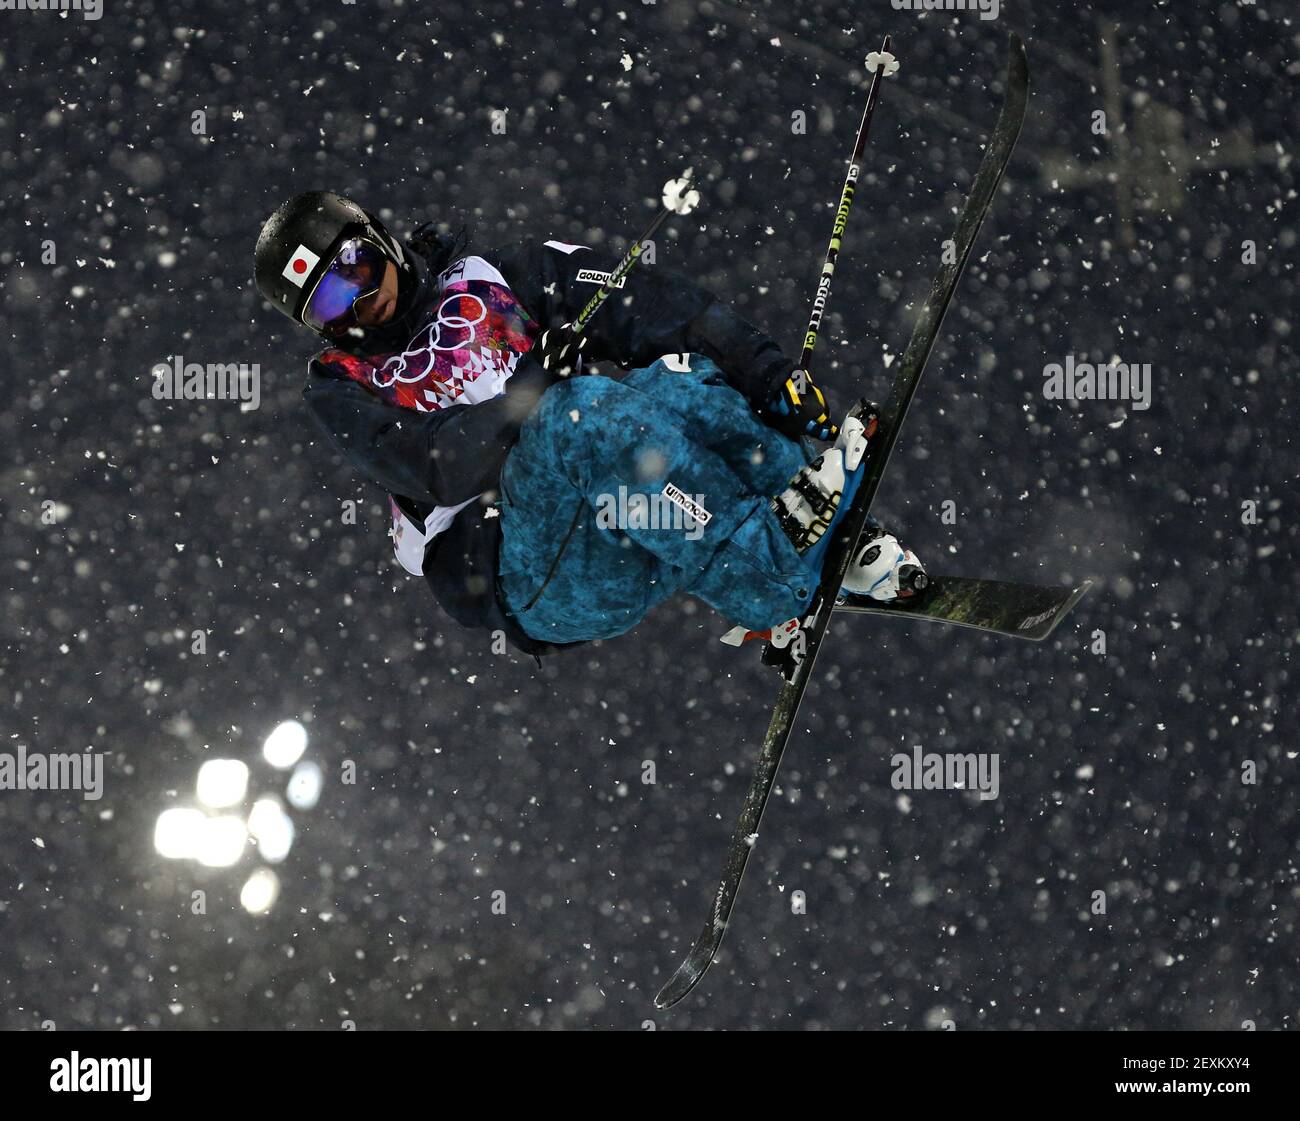 Kentaro Tsuda of Japan competes during the men's ski halfpipe at Rosa Khutor Extreme Park during the Winter Olympics in Sochi, Russia, Tuesday, Feb. 18, 2014. (Photo by Brian Cassella/Chicago Tribune/MCT/Sipa USA) Stock Photo